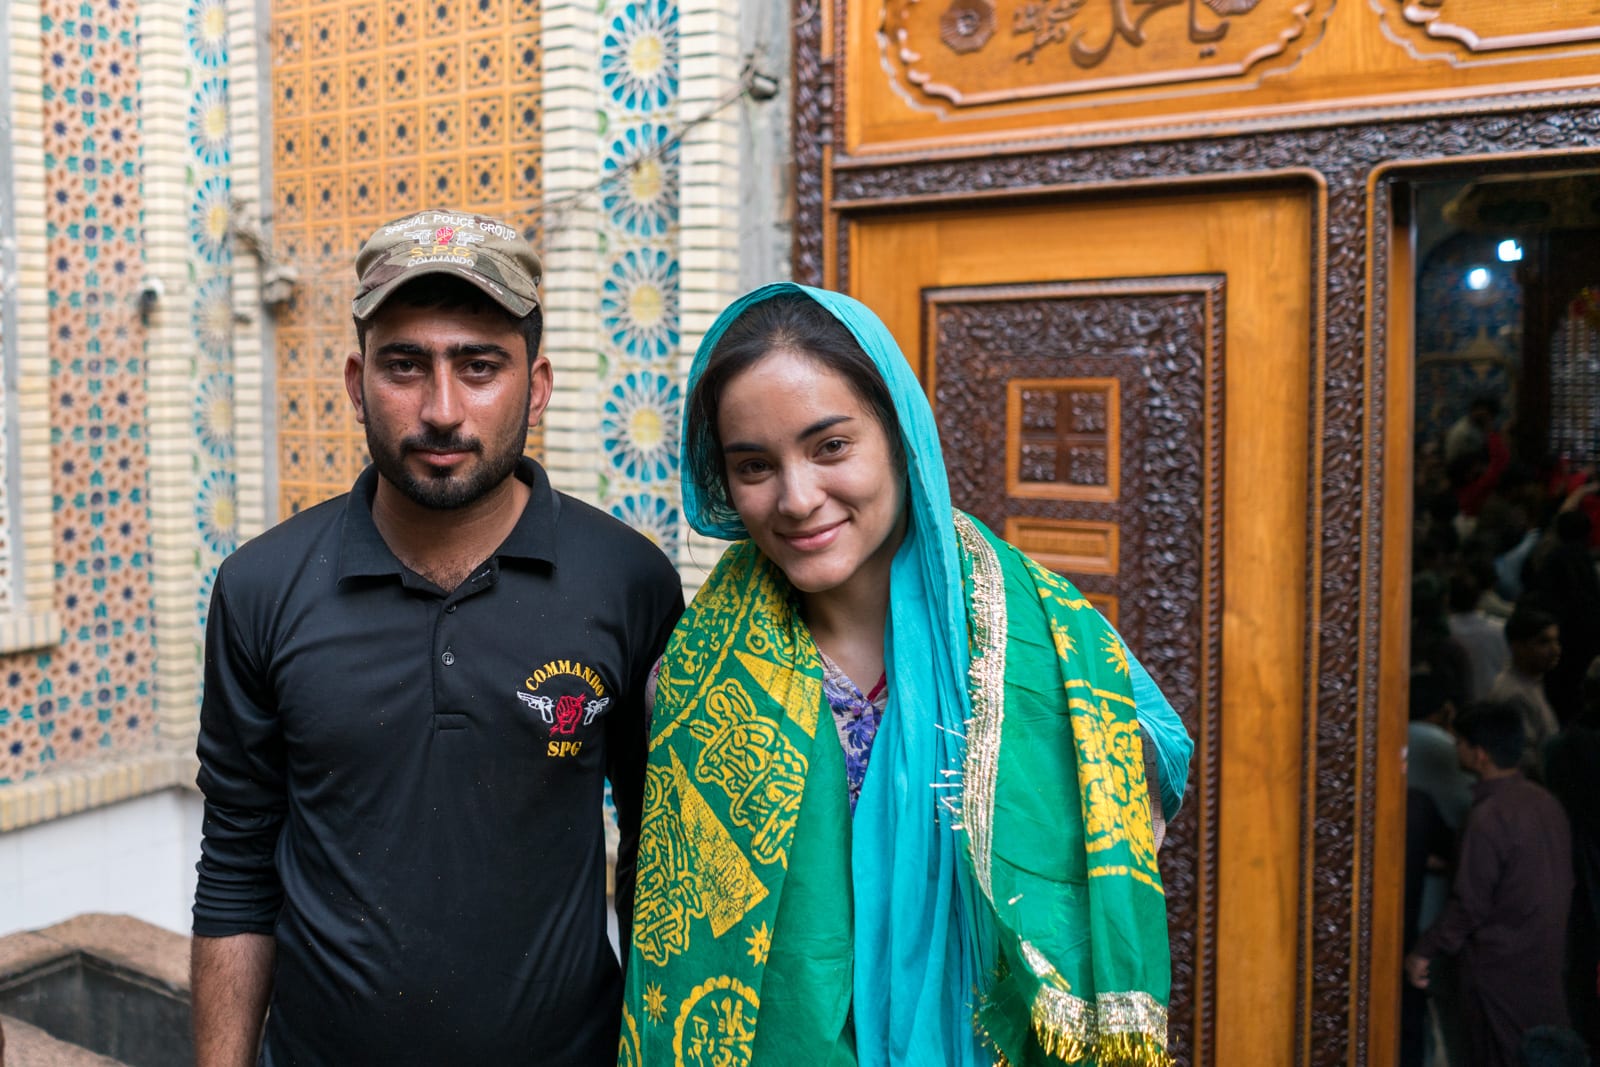 Sindh travel guide - With security guard at urs of Lal Shahbaz Qalandar in Sehwan Sharif, Pakistan - Lost With Purpose travel blog